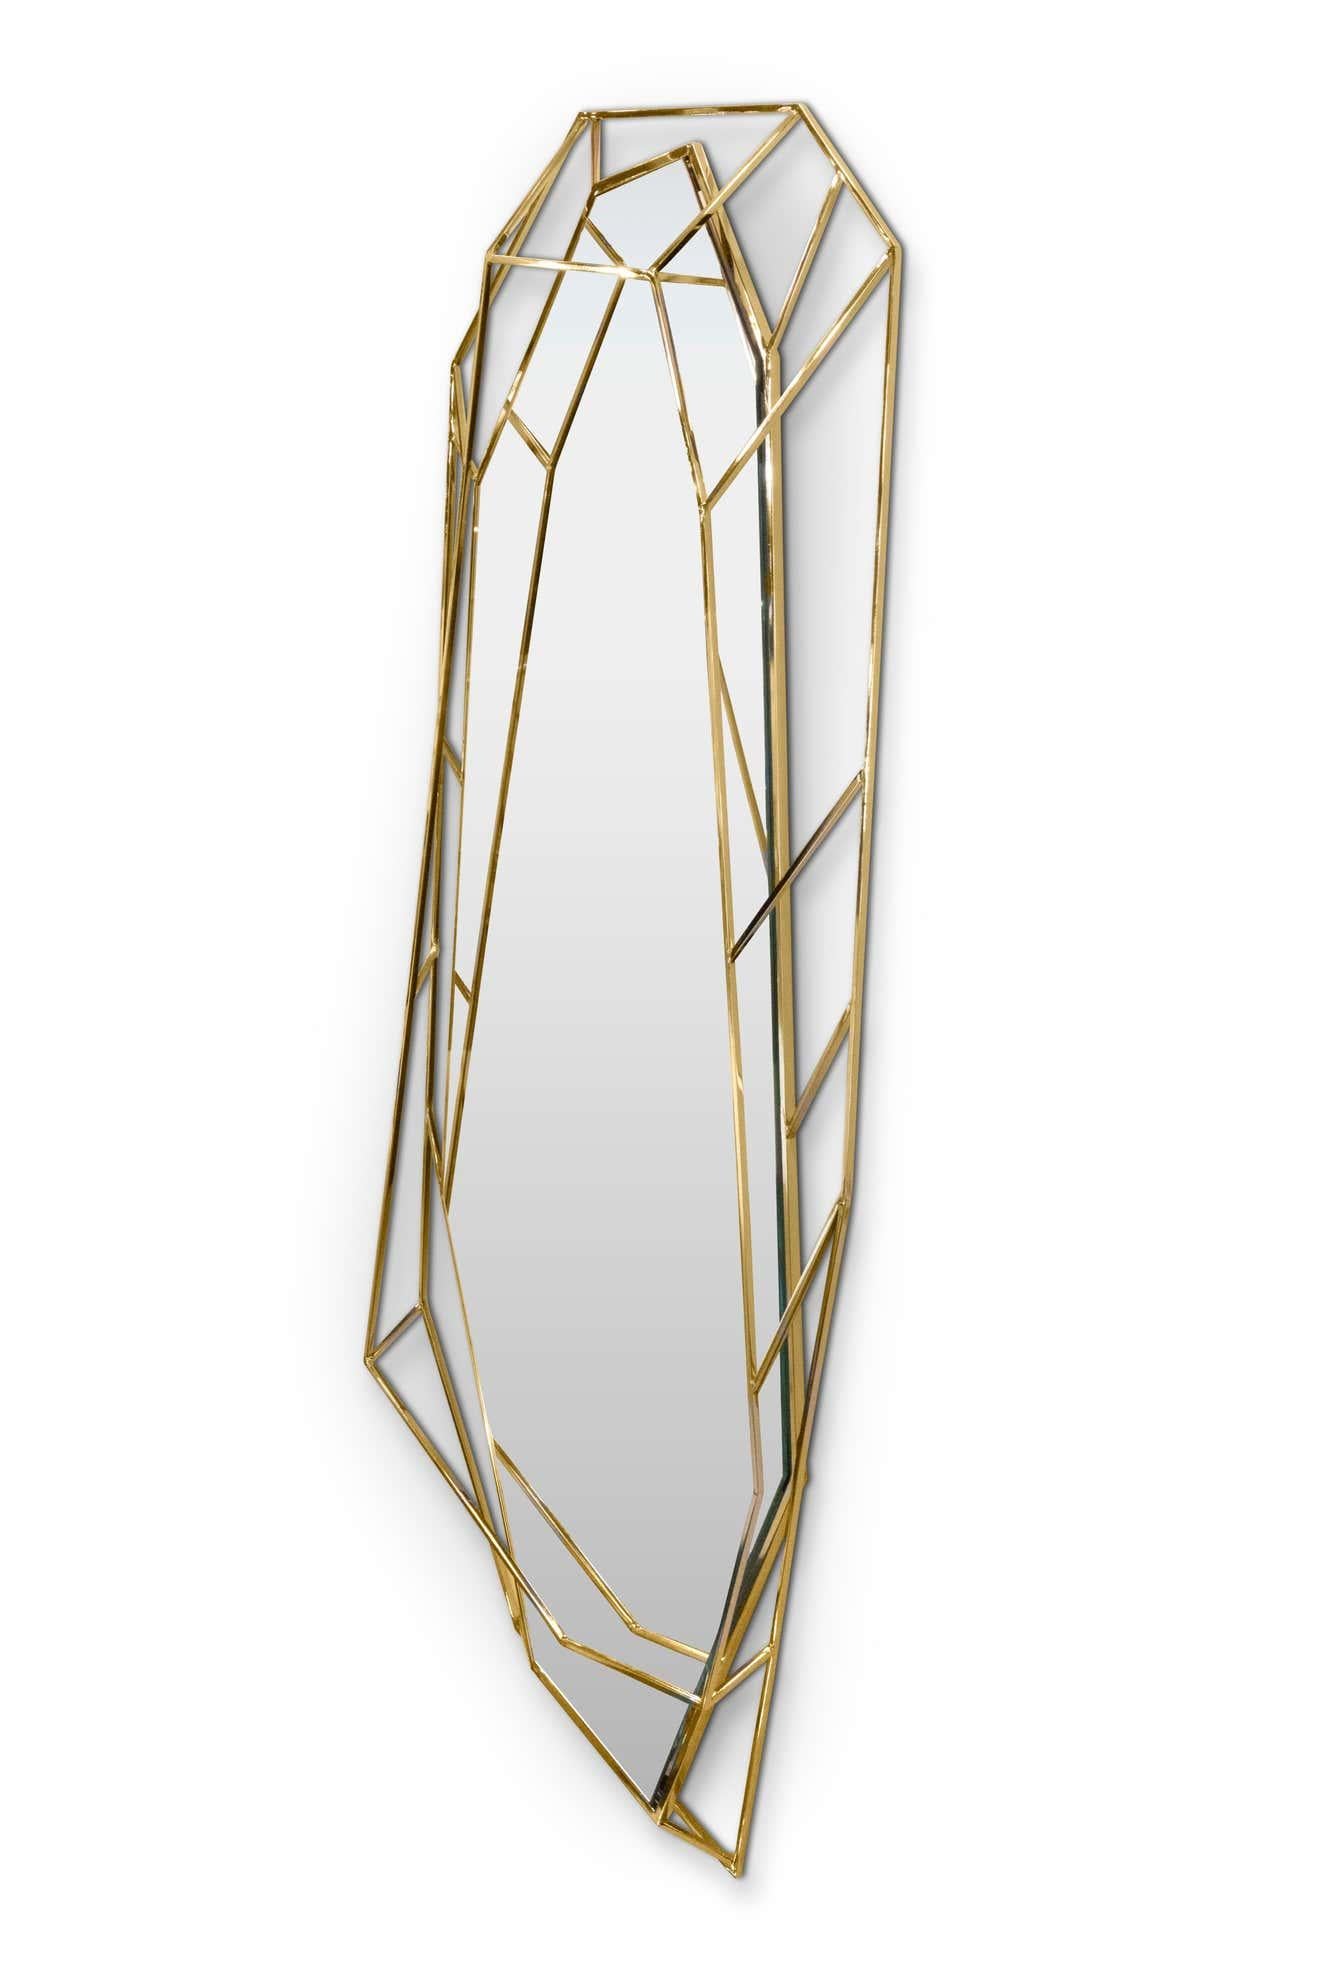 Mirror crystal 
Materials: polished brass and mirror
Estimated production time: 8 - 9 weeks
Measures: Height: 180 cm
Width: 90 cm
Depth: 15 cm.